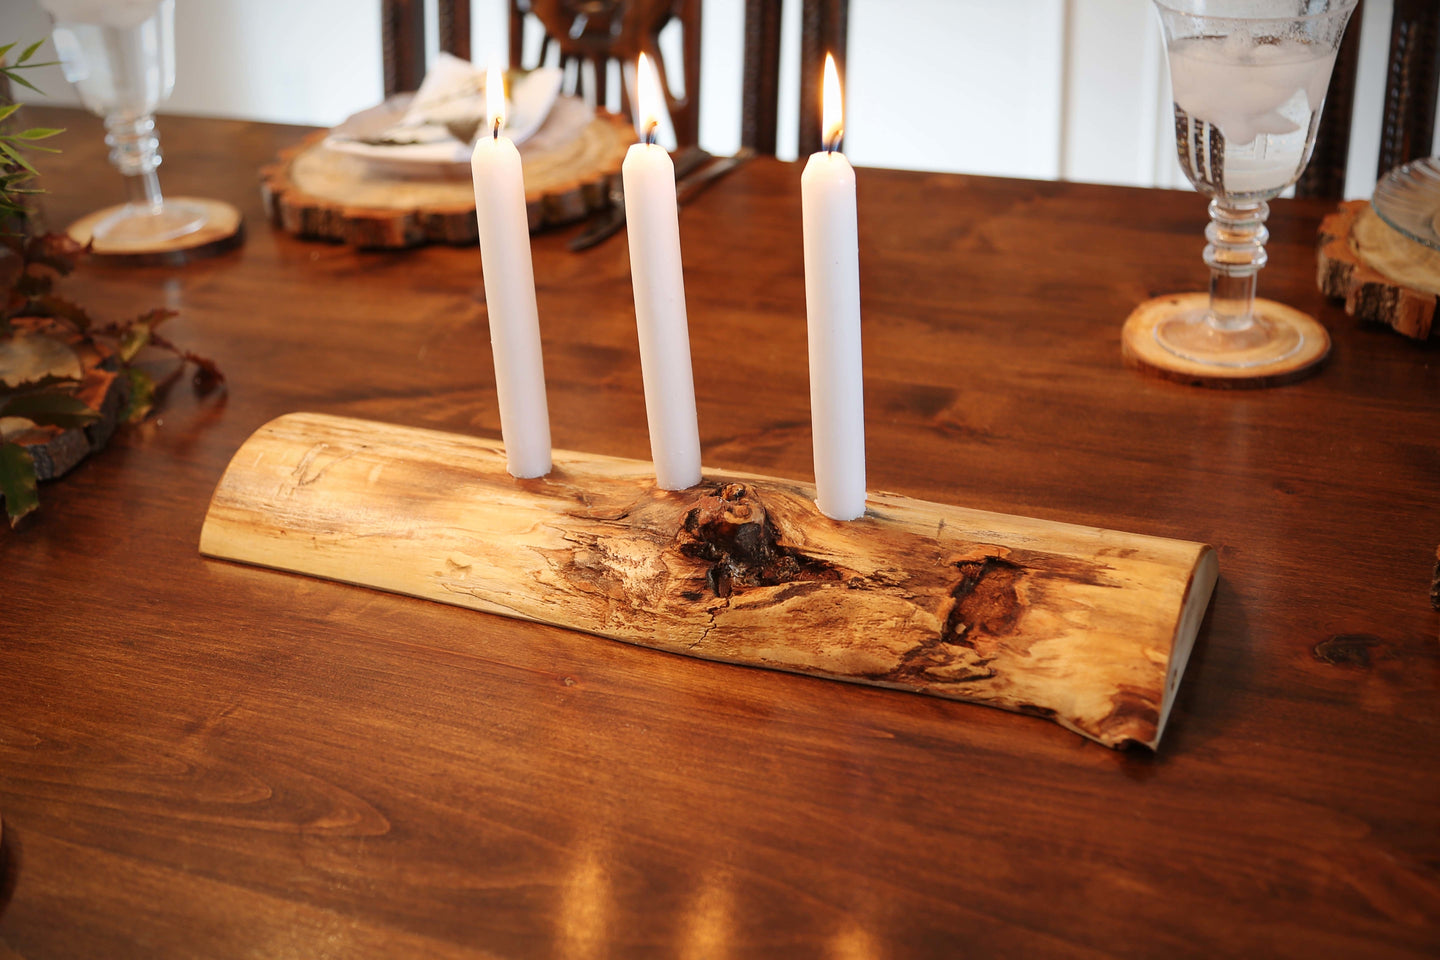 Gorgeous handcrafted solid wood modern live edge bark aspen quakie candle holder. Made in the U.S.A. these candle holders are very classy and elegant. Sure to be a conversation piece in any home or cabin. Use these chargers to place plates on to complete your dining, coffee or end table. 